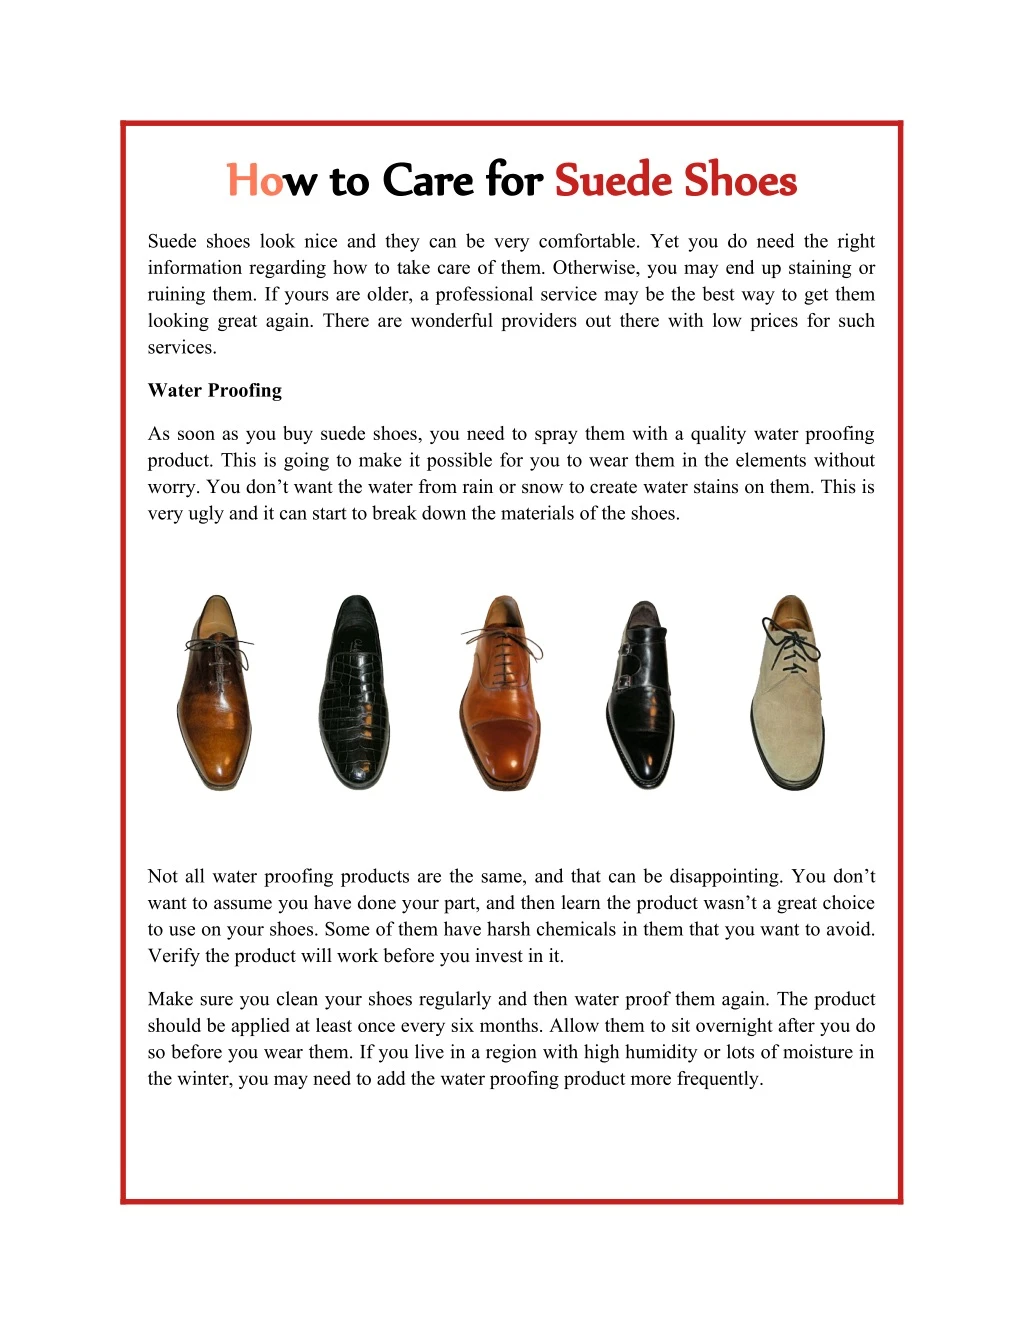 ho how to care for w to care for suede shoes